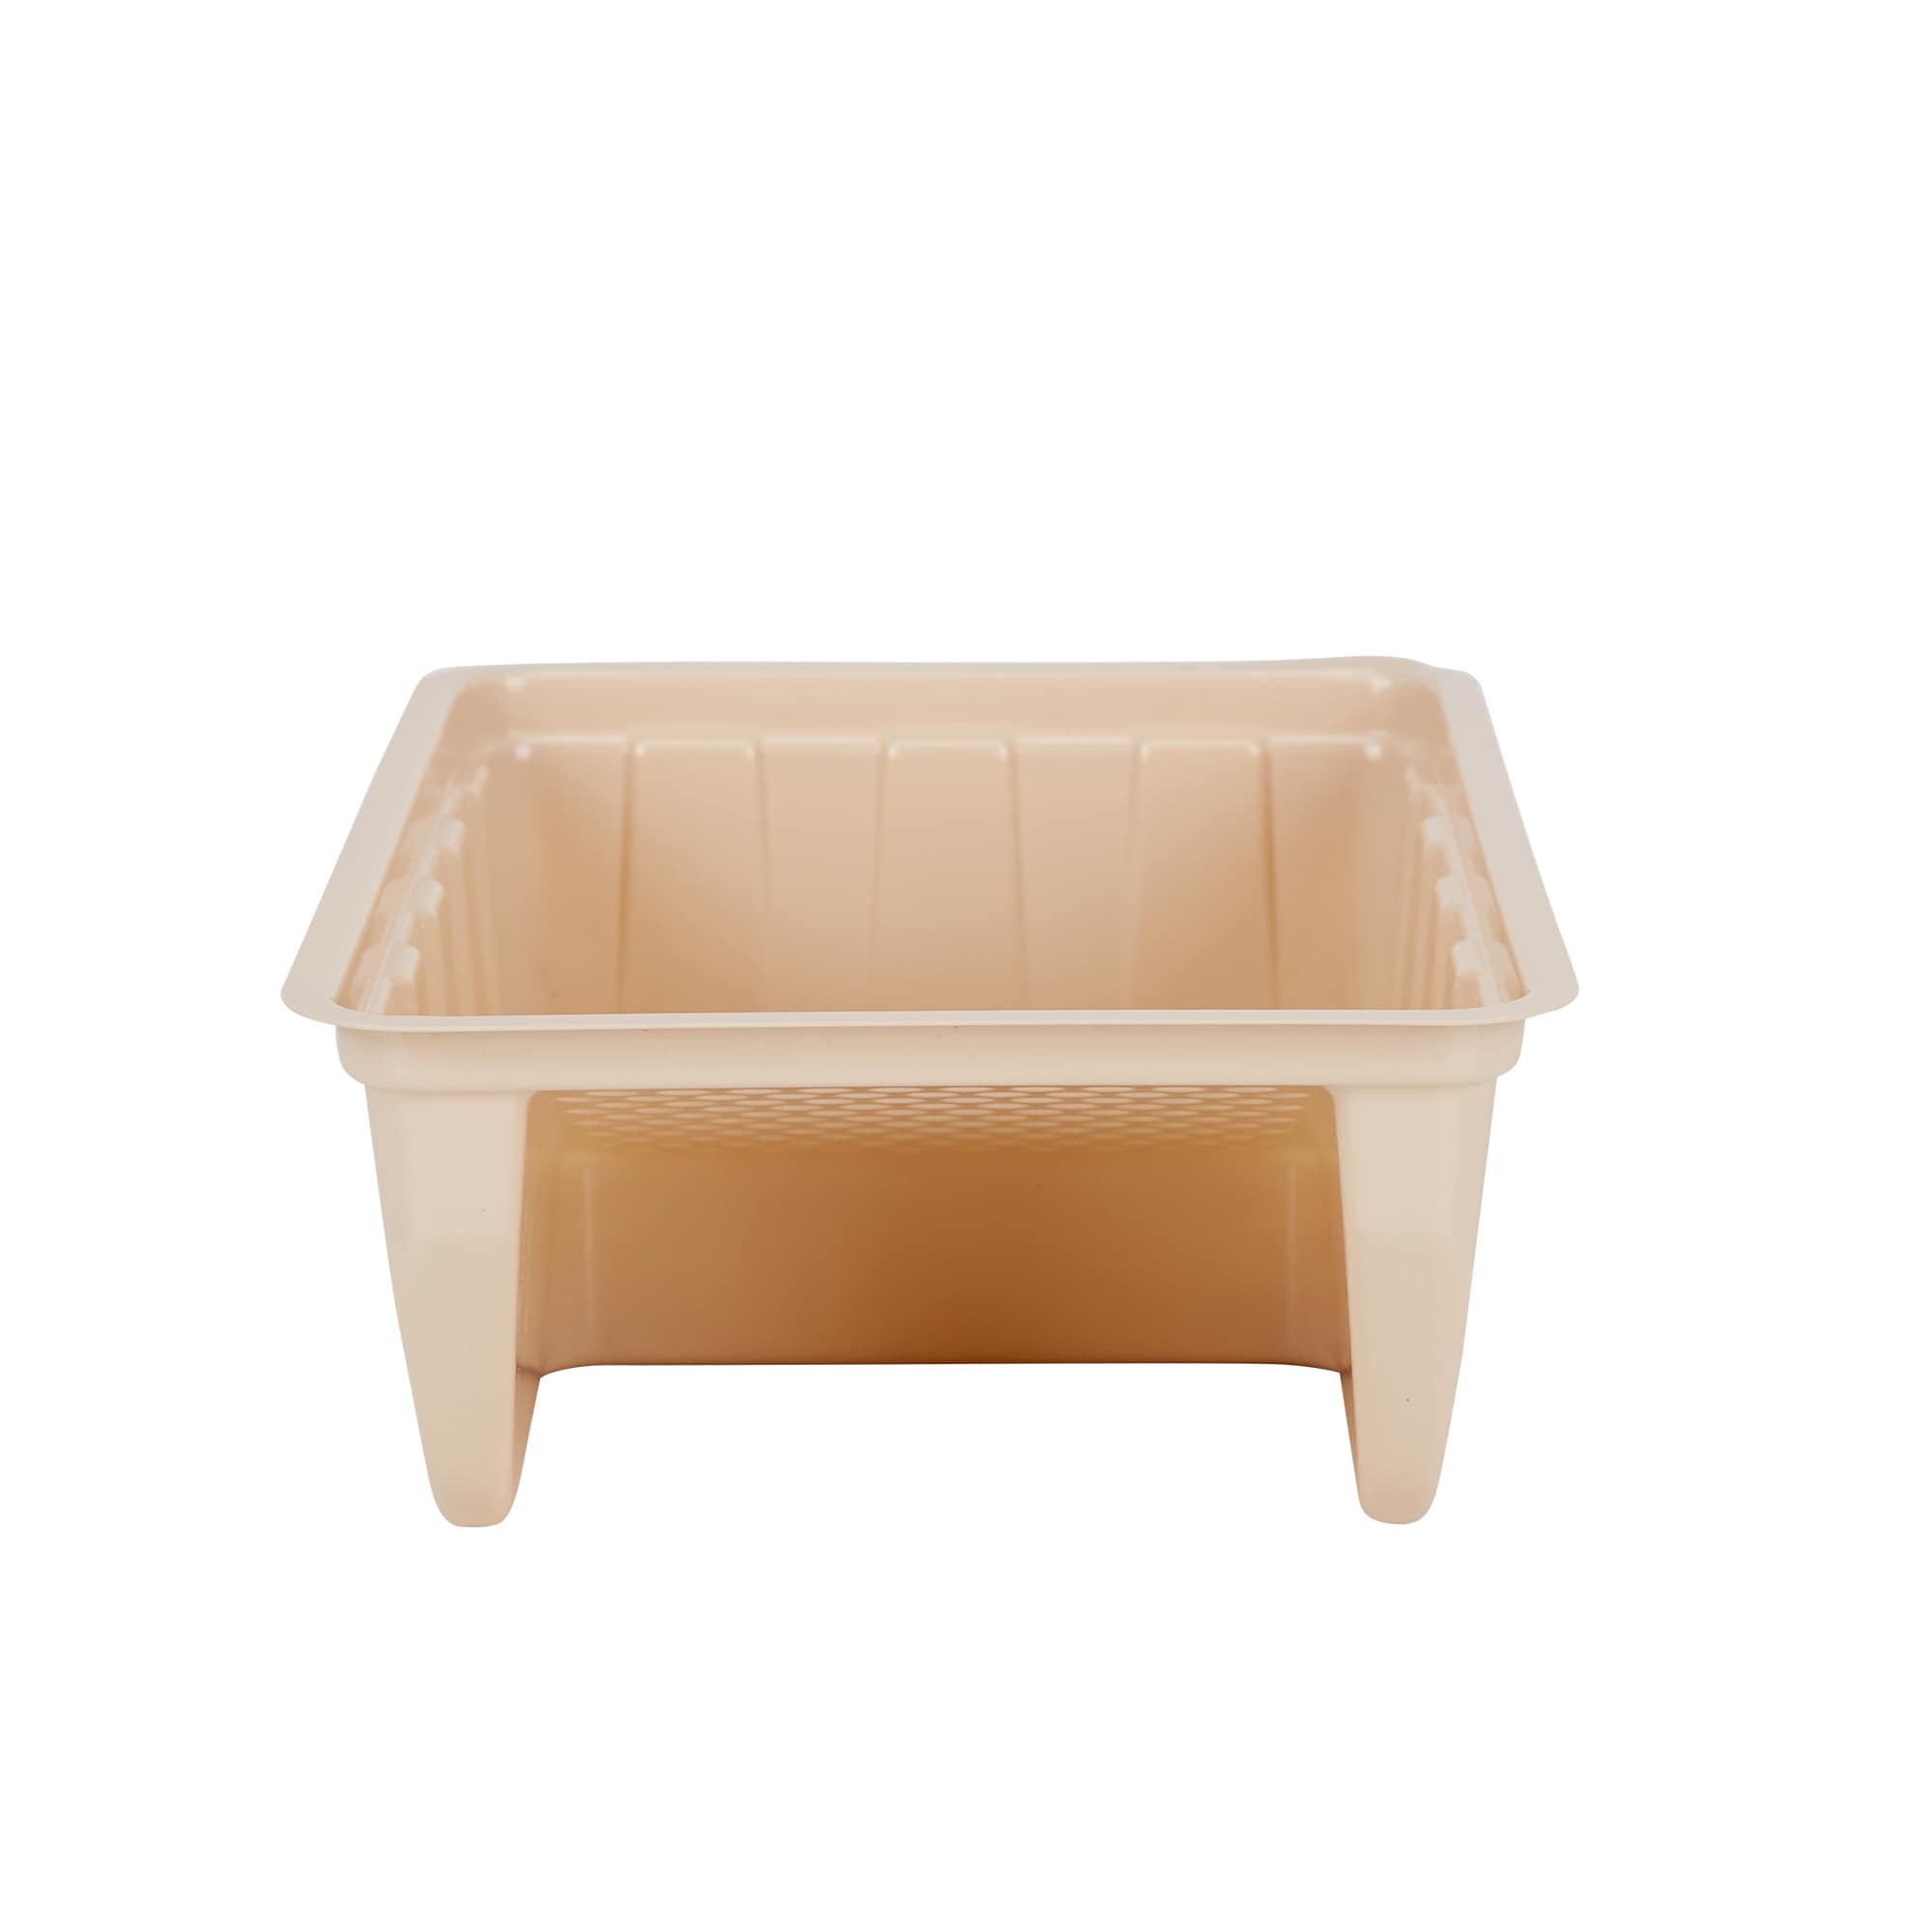 Deep Well Plastic Paint Tray-Wholesale Price at Mazer Wholesale